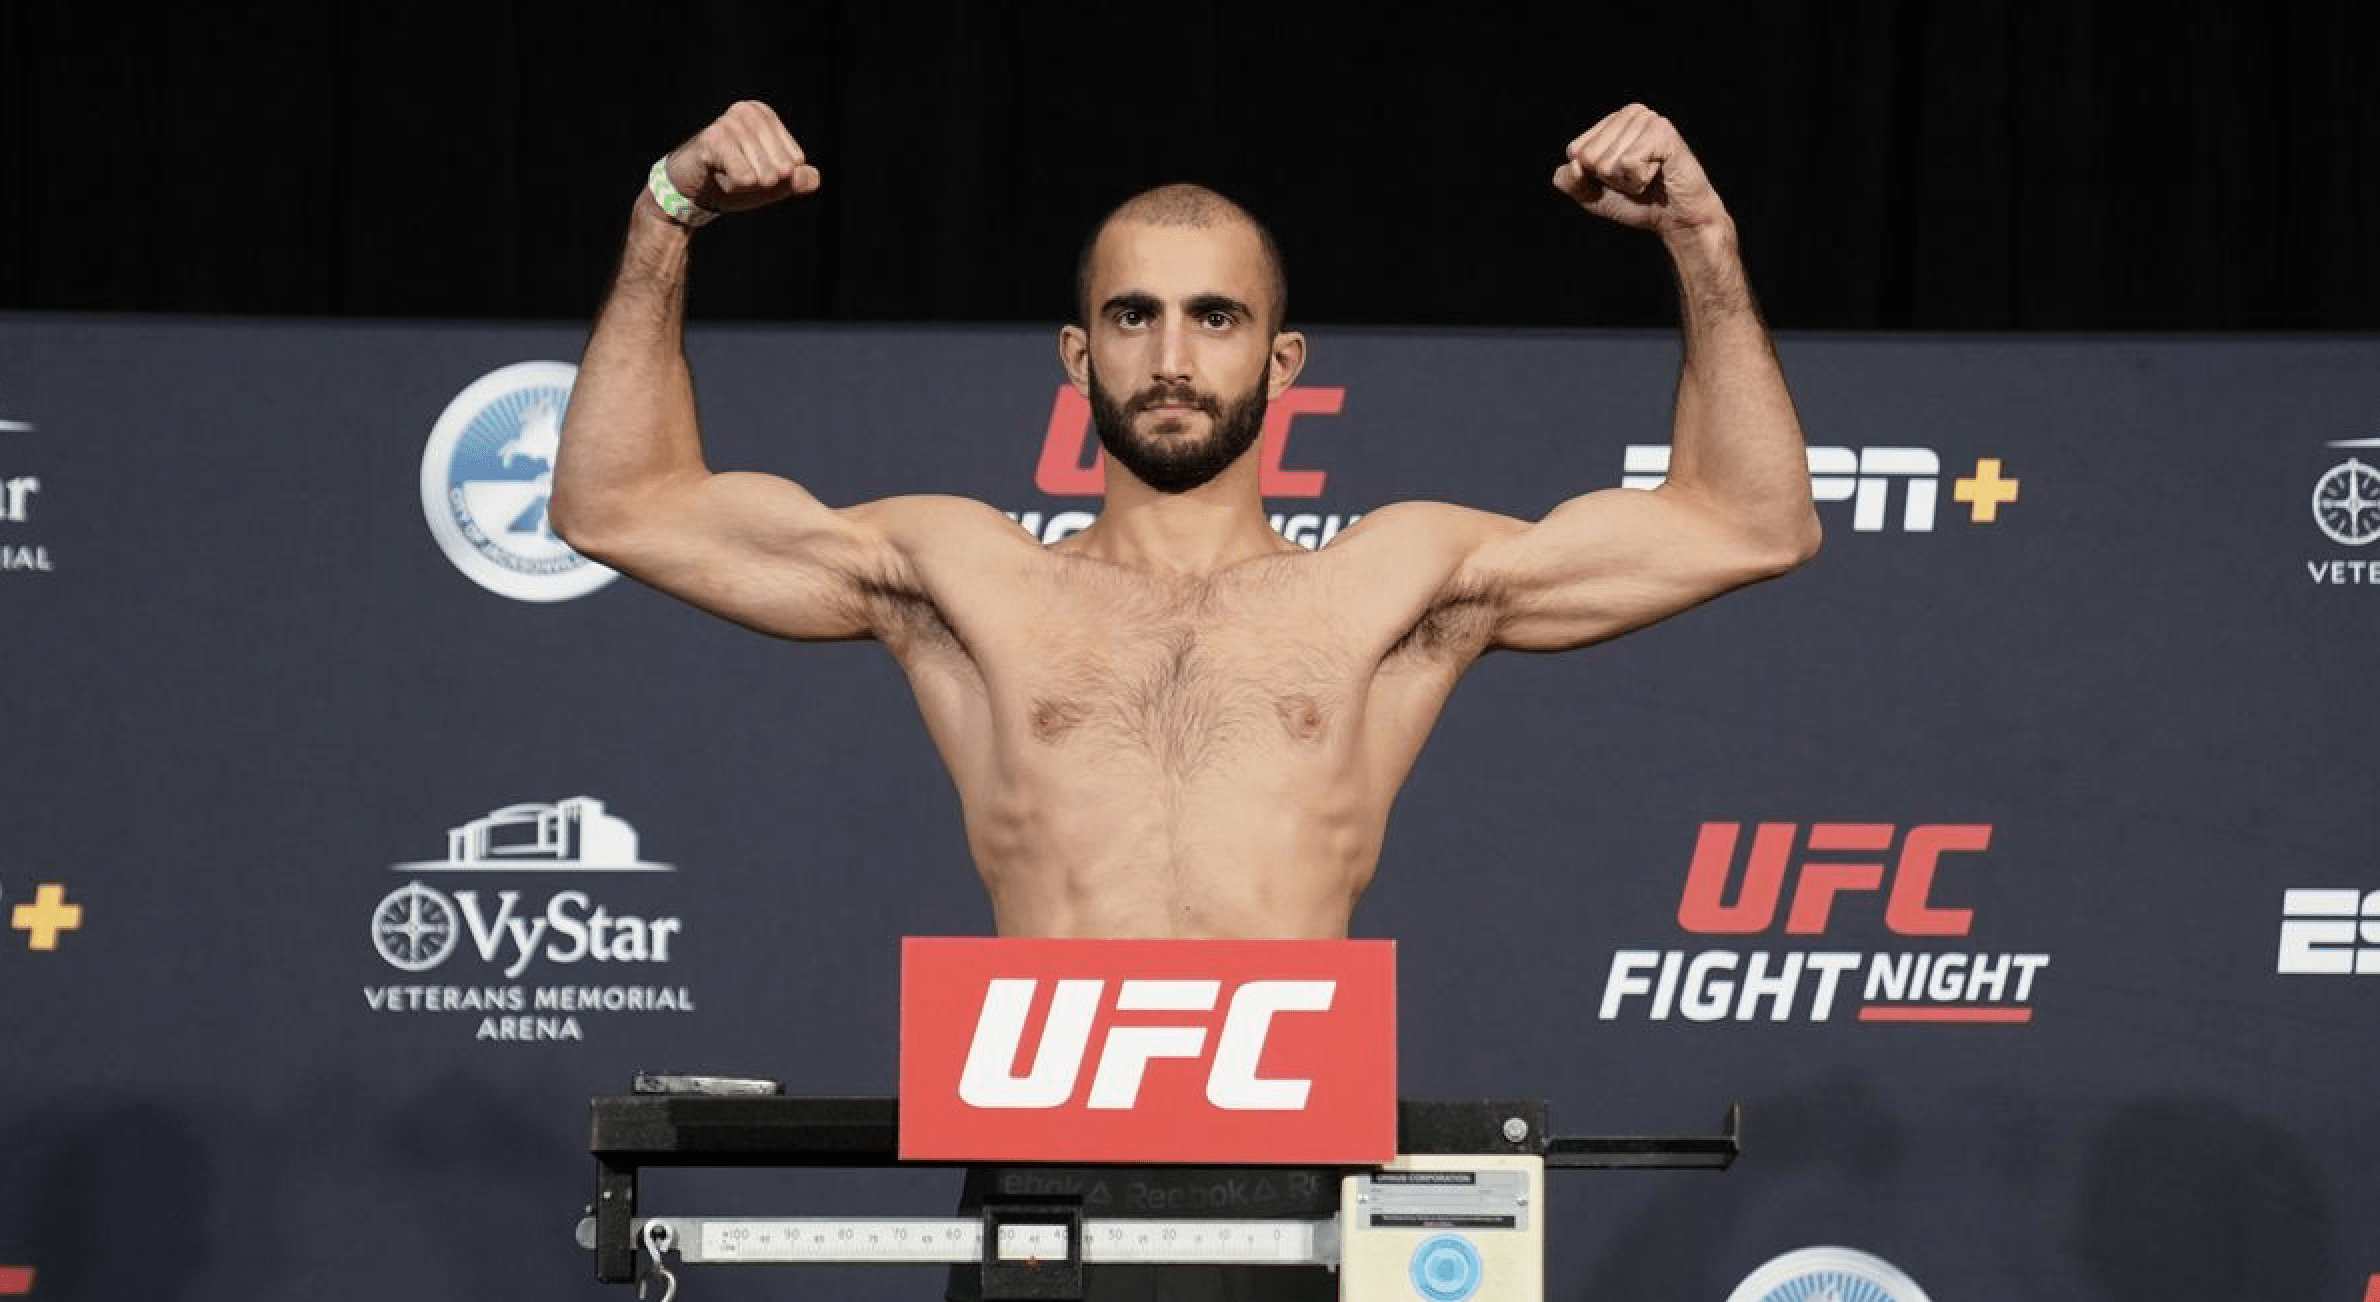 UFC: Giga Chikadze Calls Out Edson Barboza For ‘Fight Of The Year’